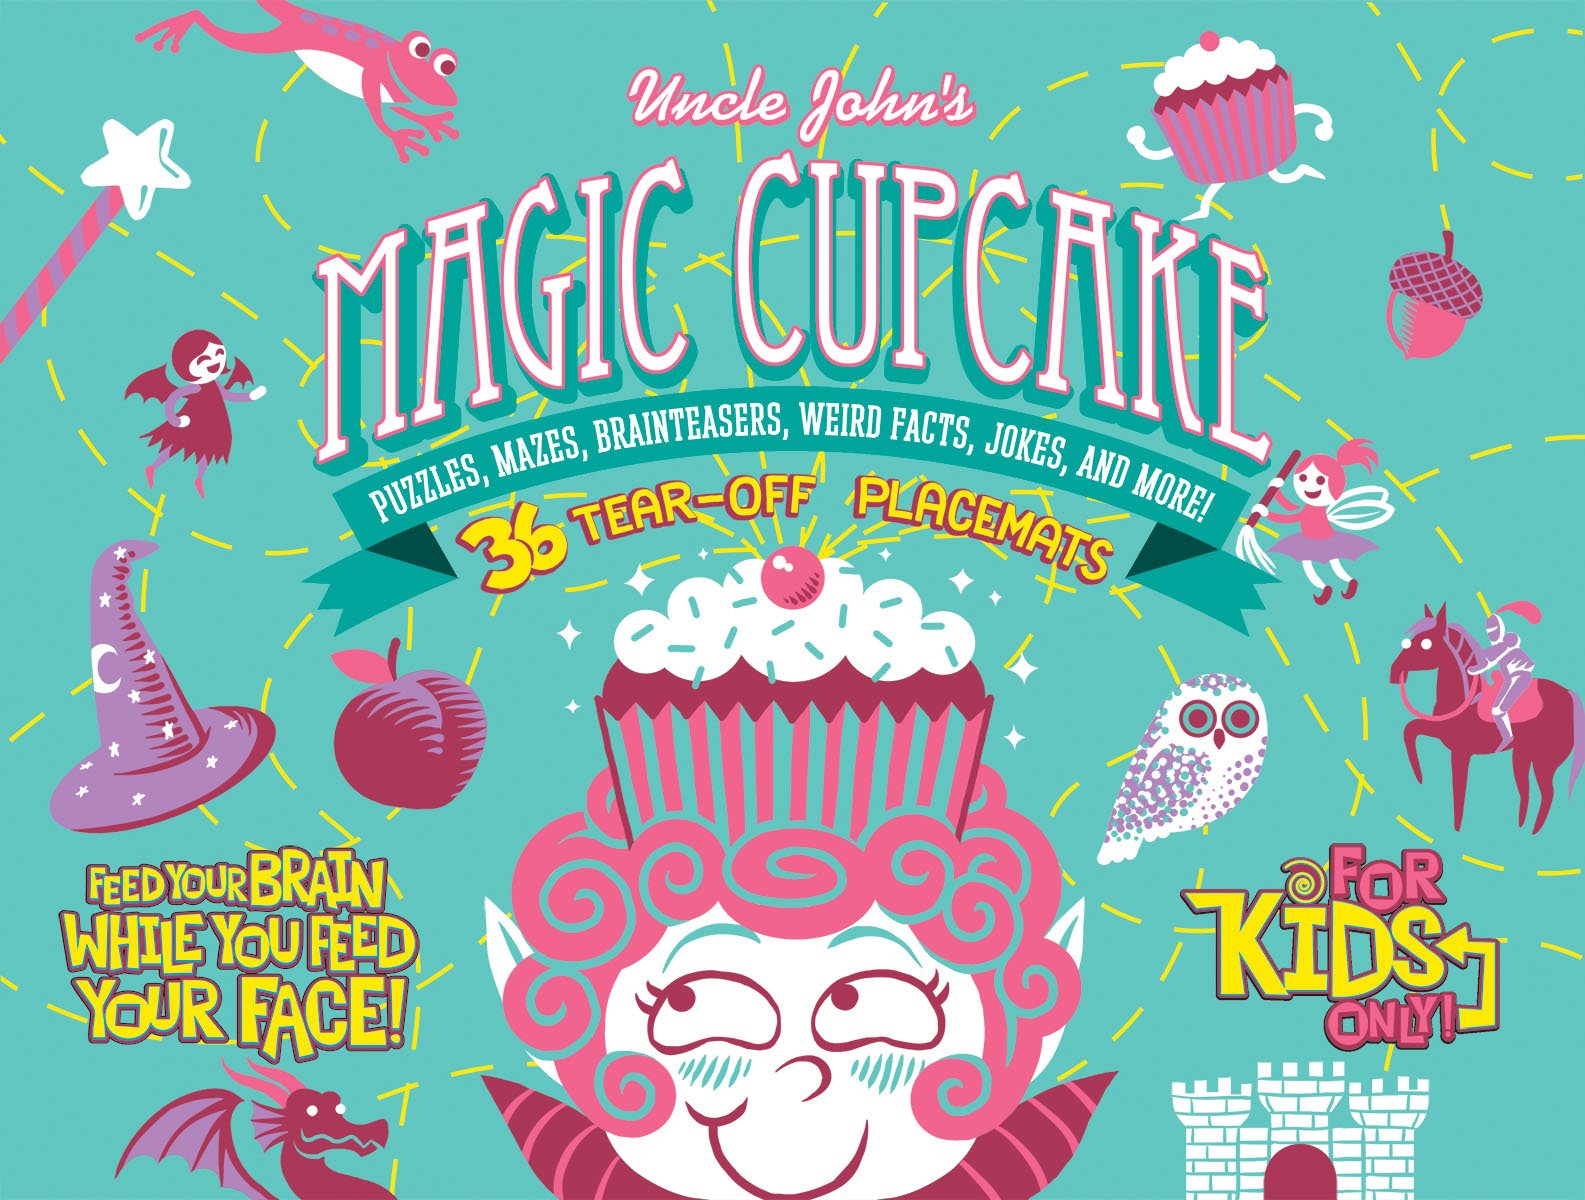 Uncle John's Magic Cupcake: 36 Tear-off Placemats For Kids Only!